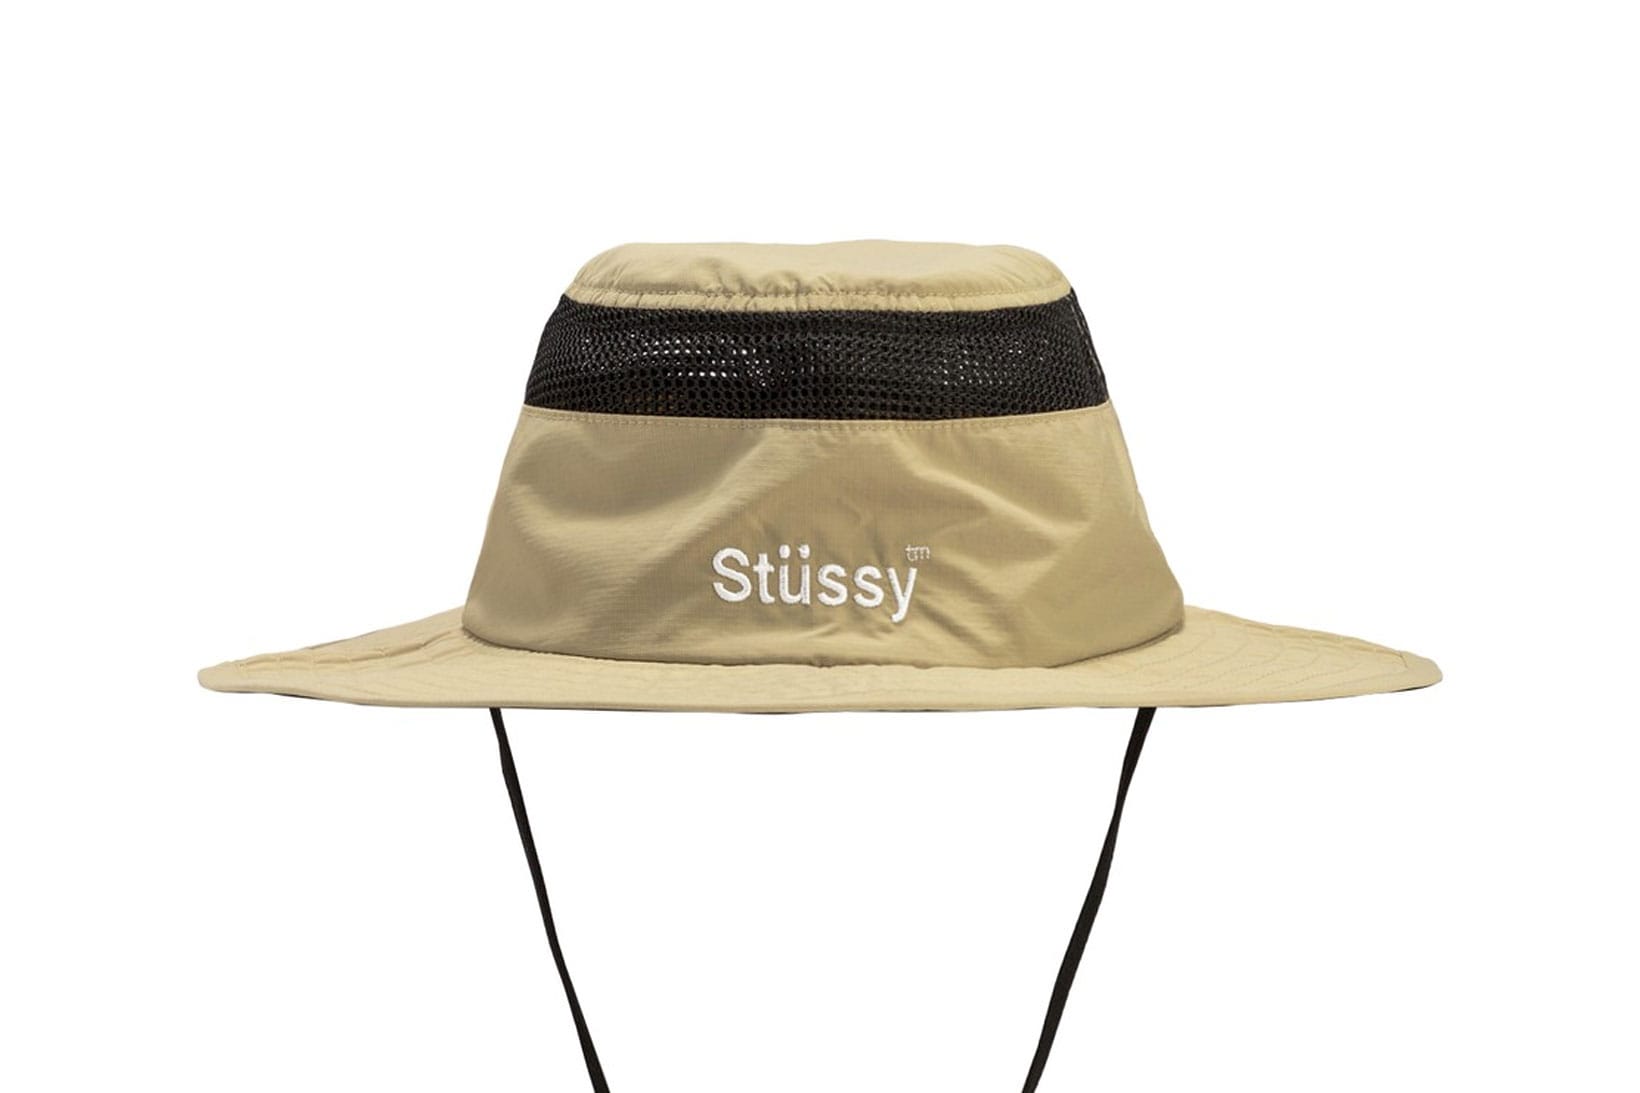 Personalized Summer Sun Hat Fisherman Cap for Summer Travel Beach Add Your Own Text Name Black Custom Bucket Hat for Women Men